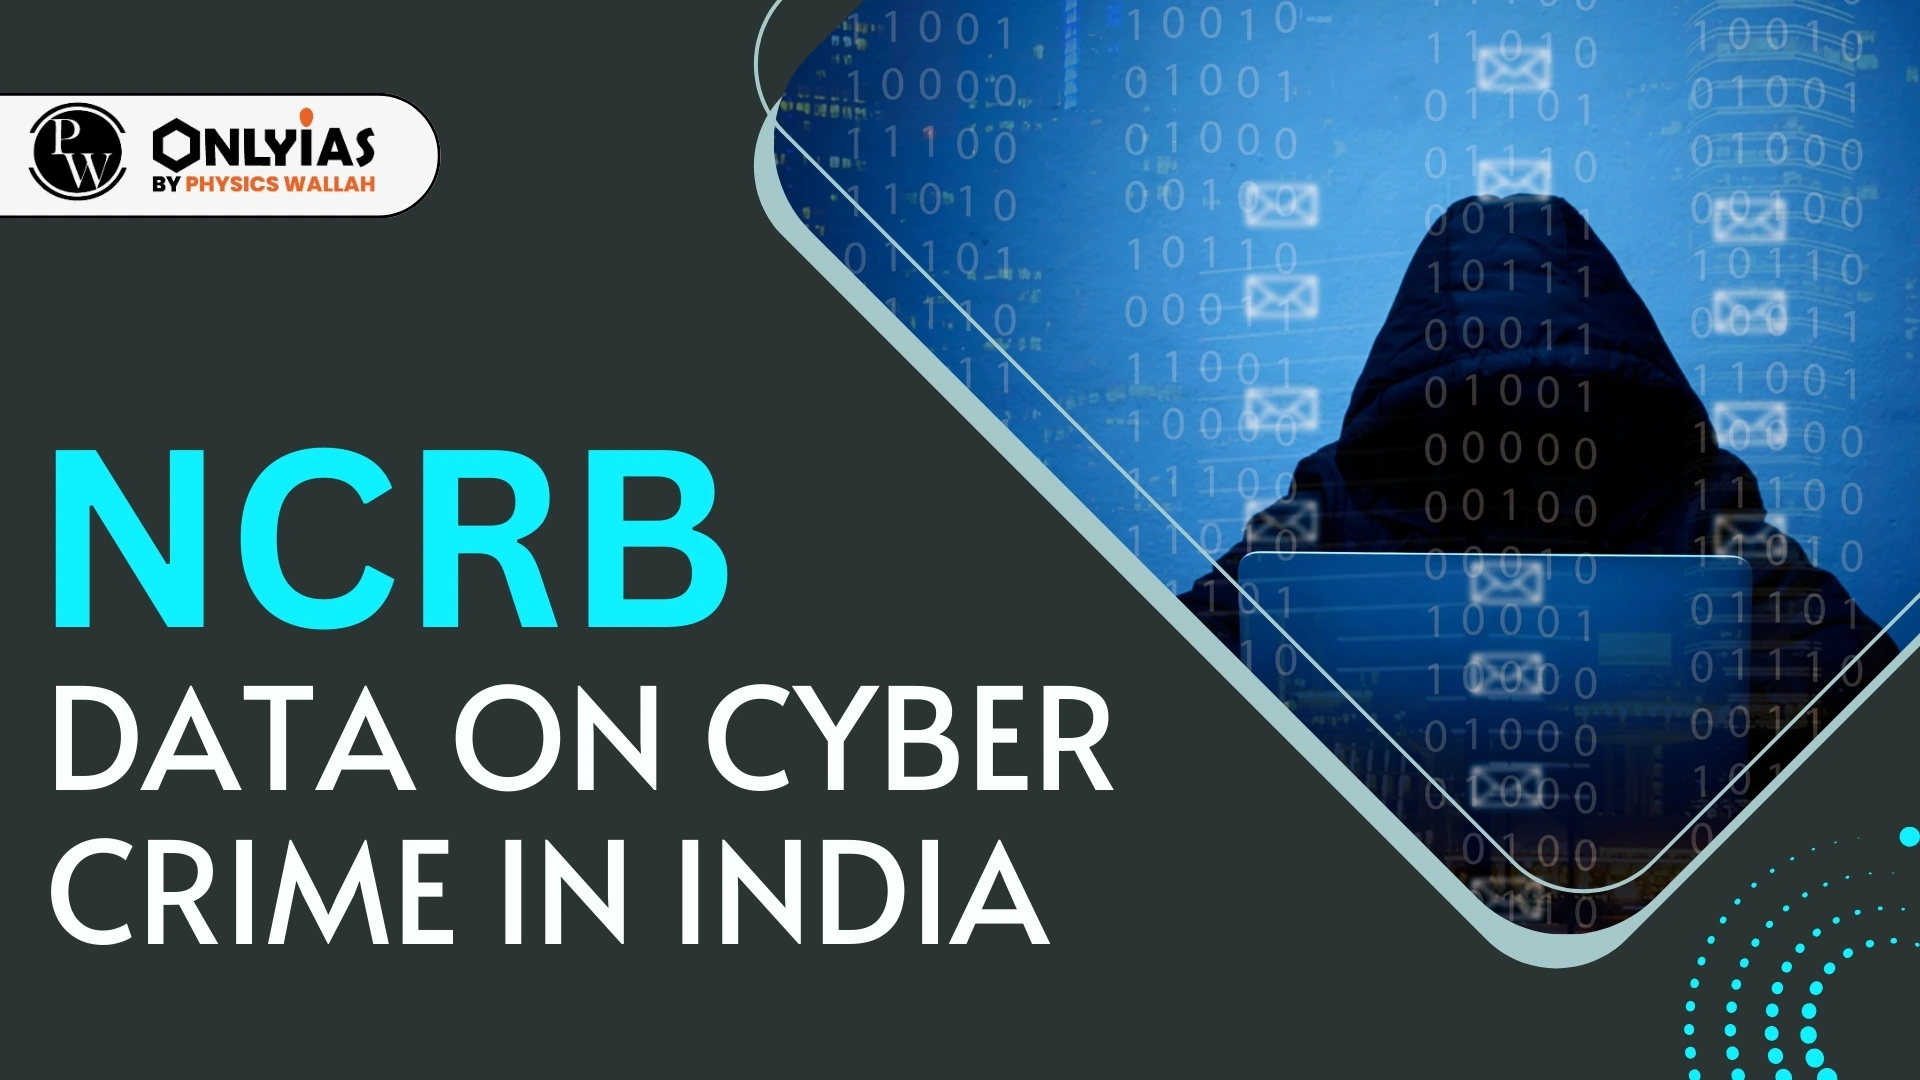 Ncrb Data On Cyber Crime In India Pwonlyias 2263